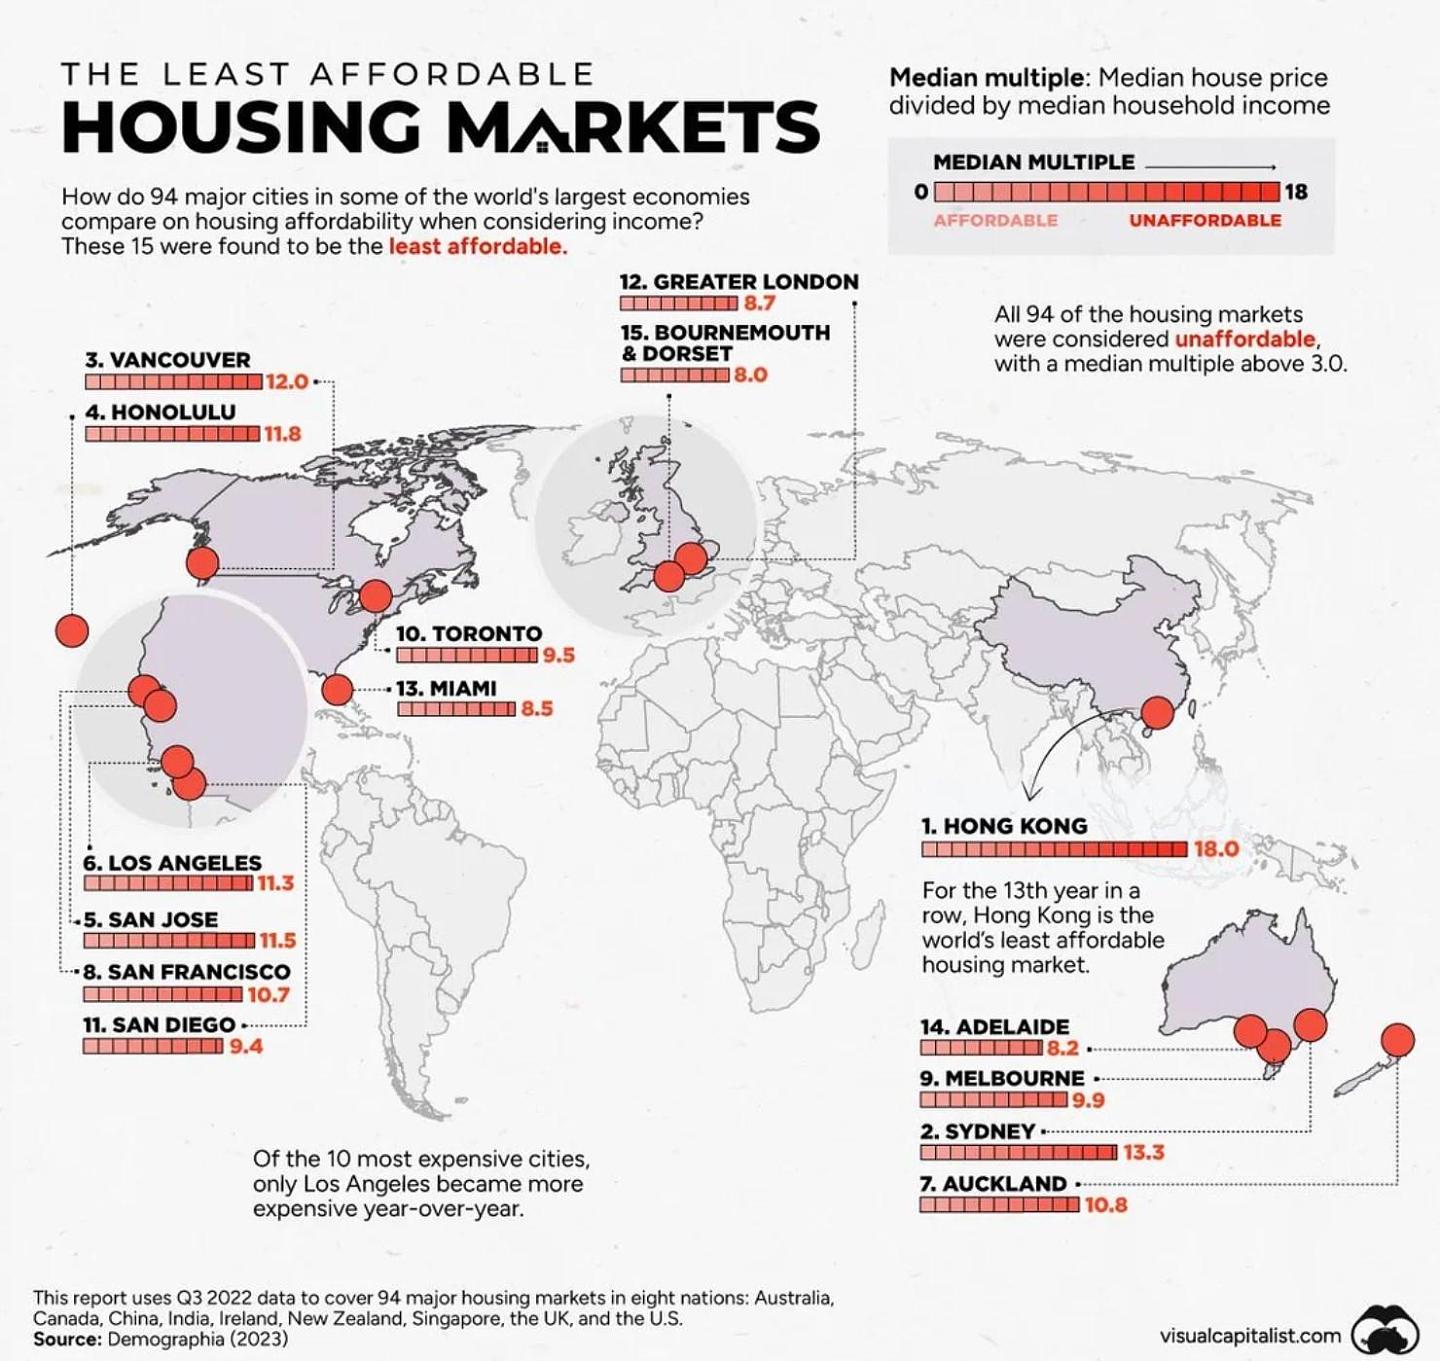 This grim map shows the least affordable housing markets in the world, with three Australian cities featuring.